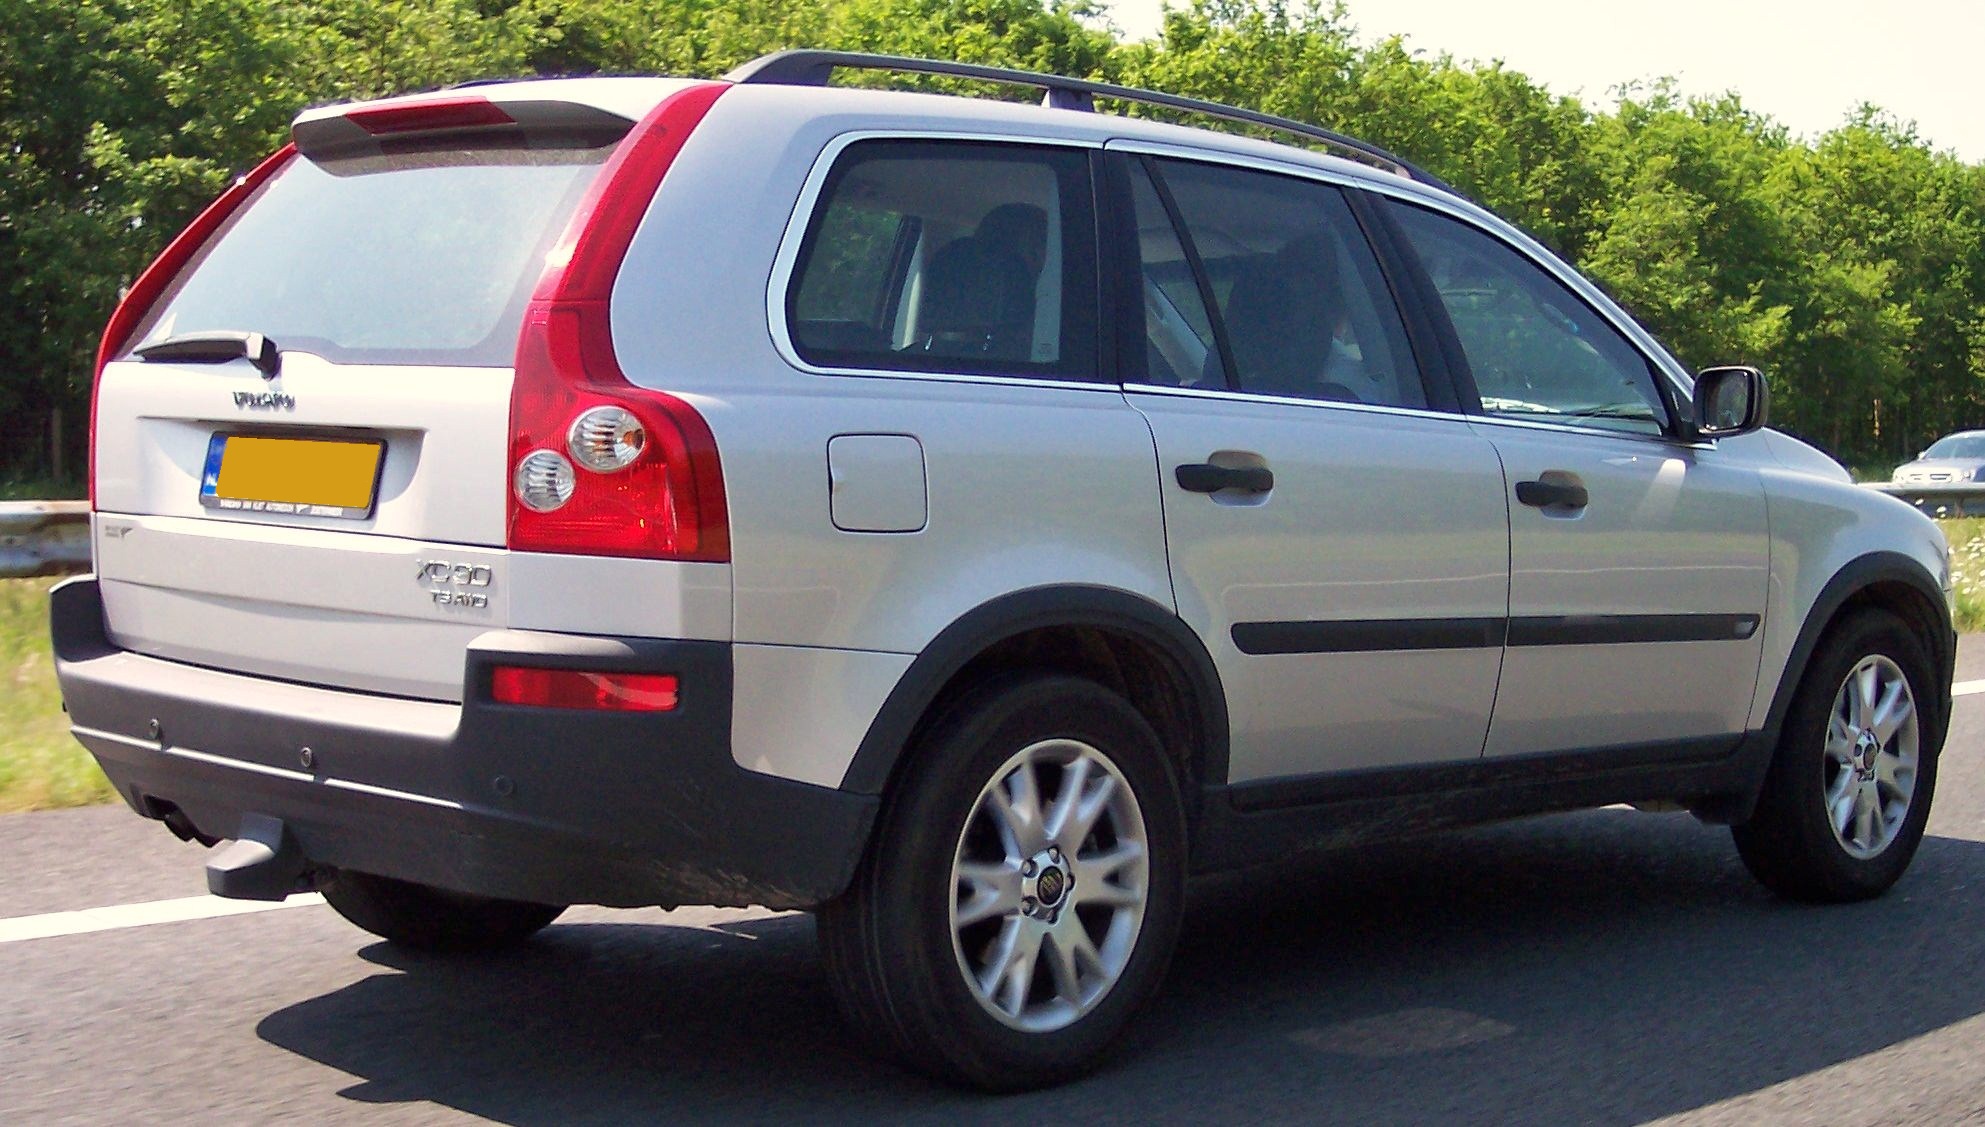 Dossier: Volvo XC 90 T6 à traction intégrale.jpg - Wikimedia Commons